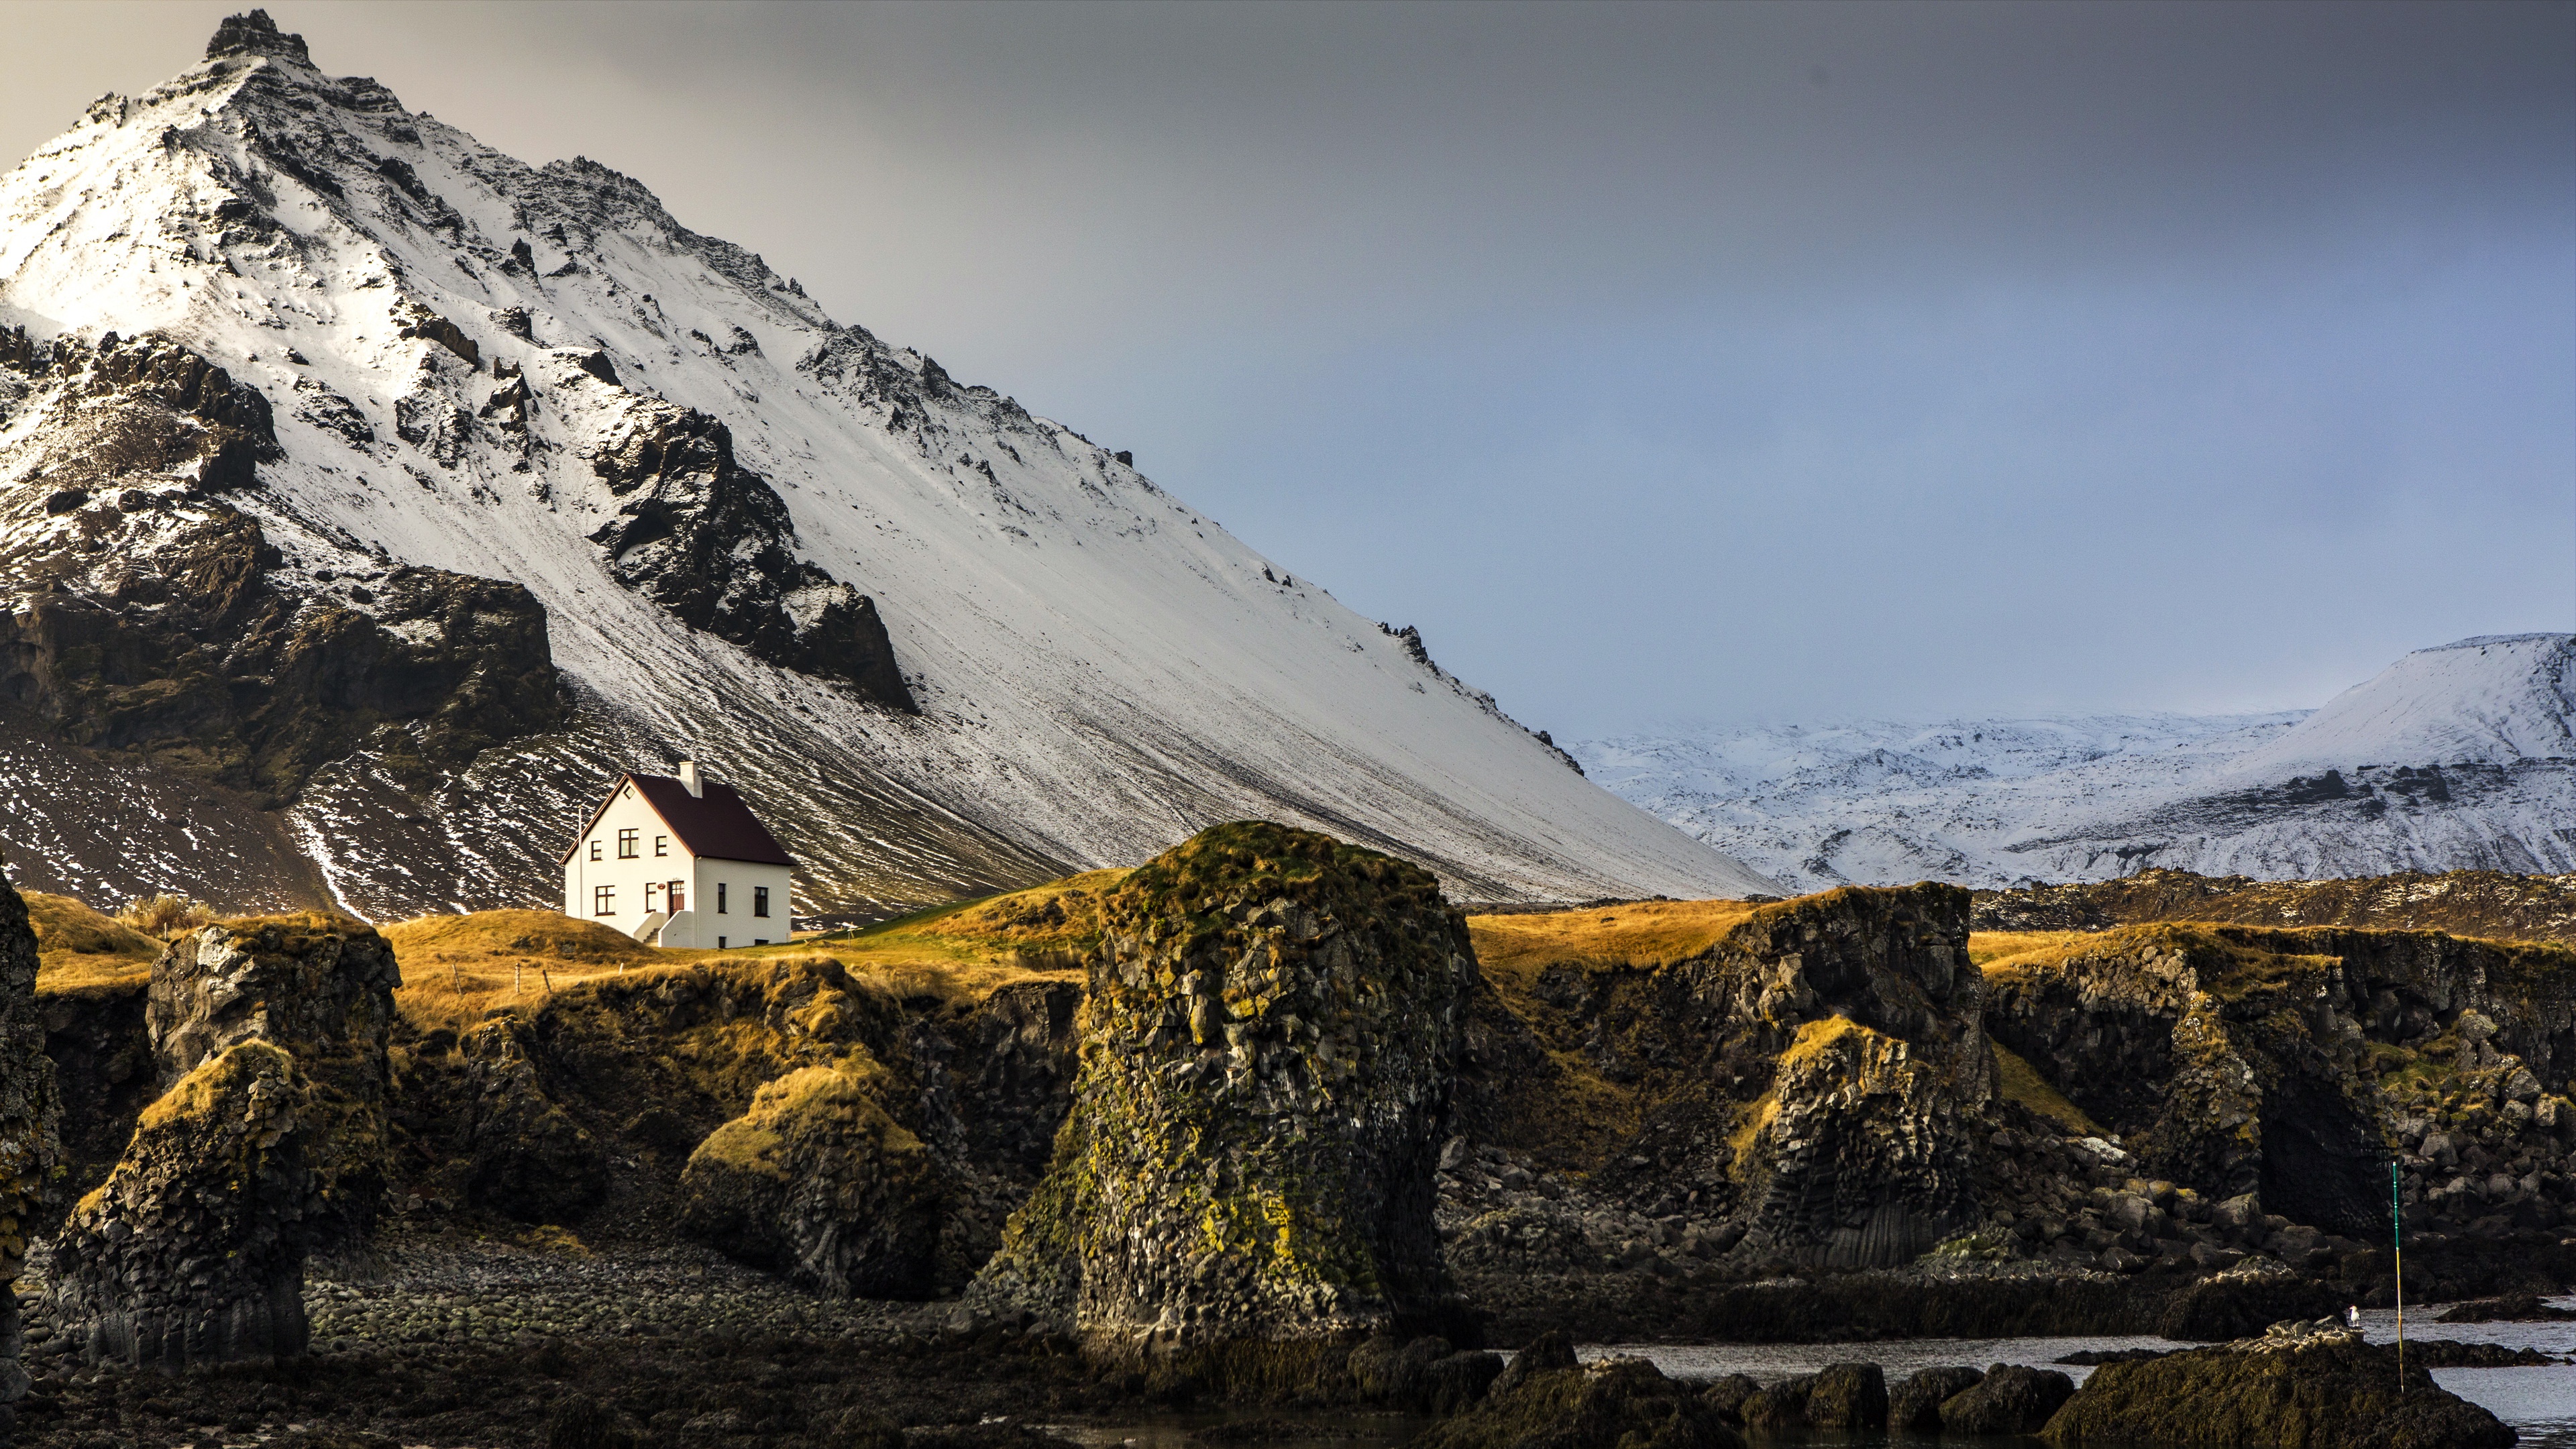 General 3840x2160 Iceland mountains house snow sky landscape nature